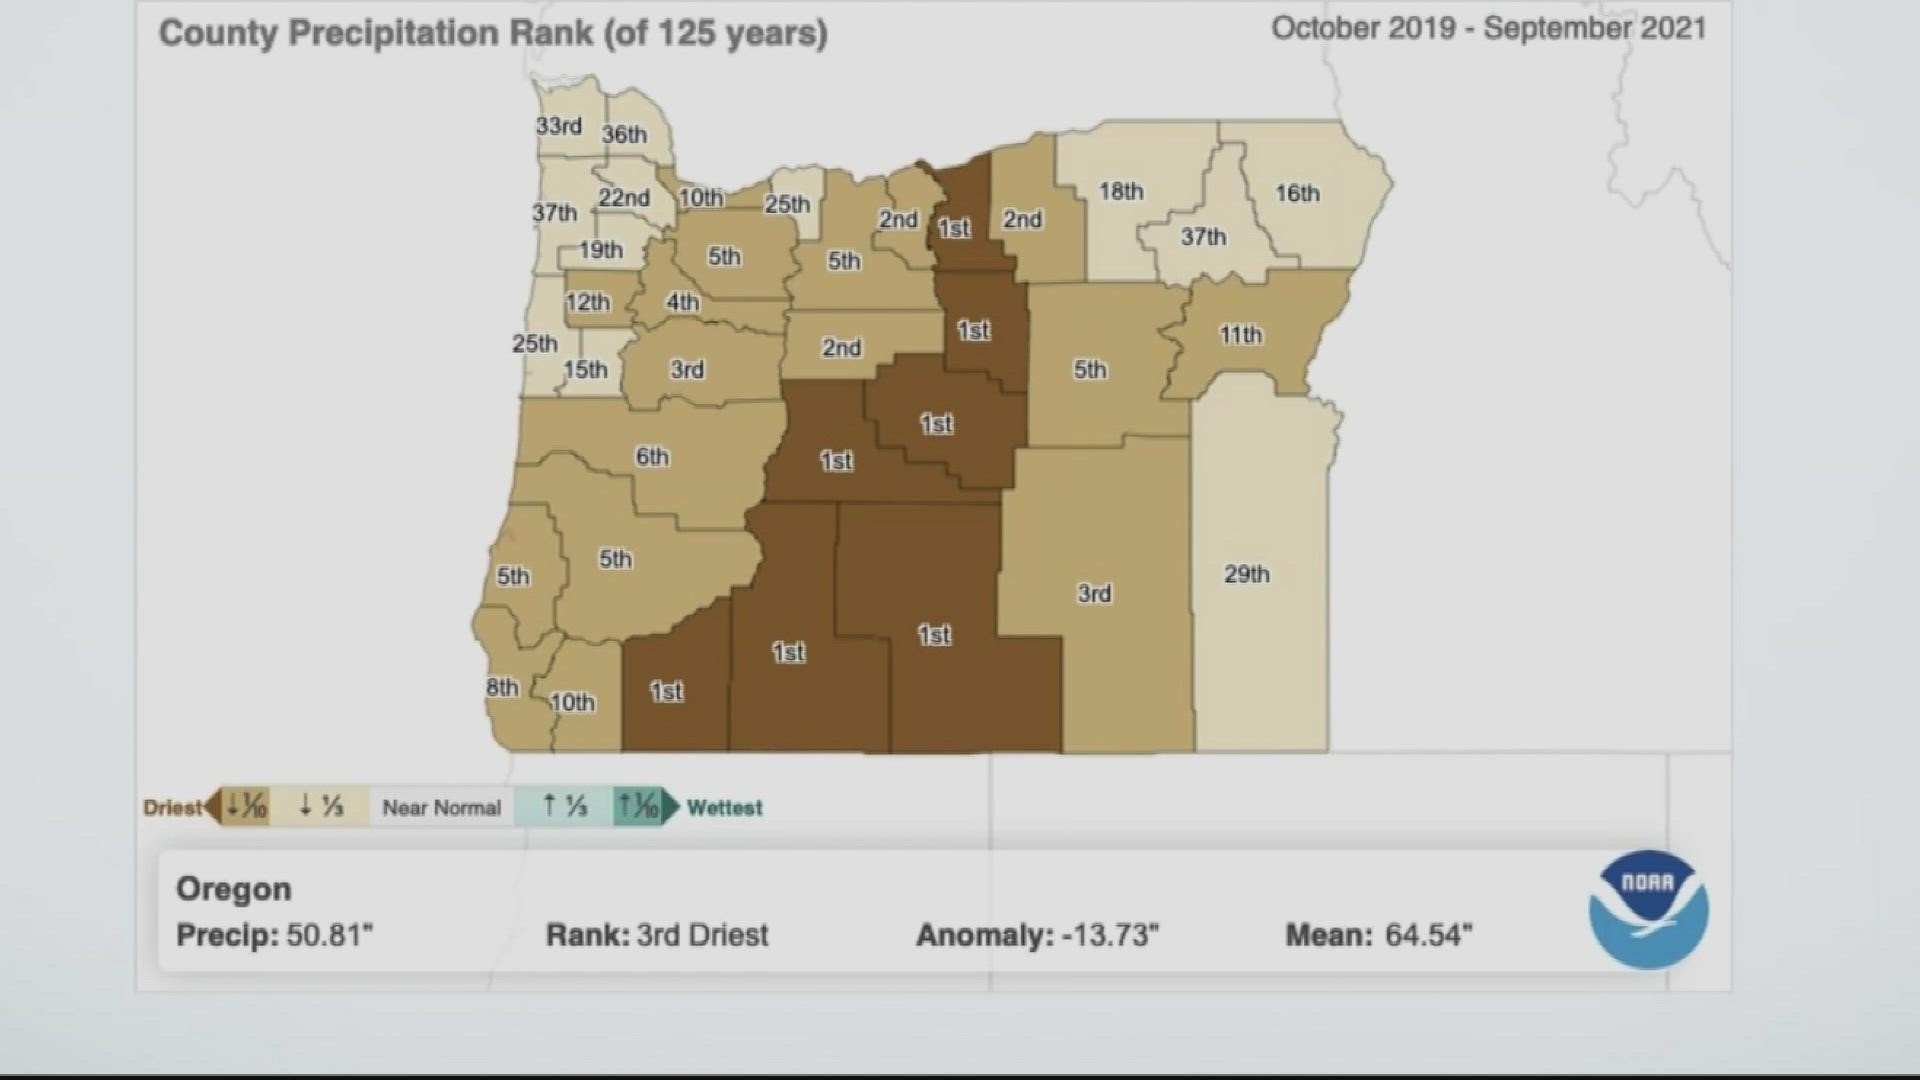 Much of Central and Eastern Oregon remains in extreme to exceptional drought. Reservoir levels there are at record lows as our traditionally wet season ends.